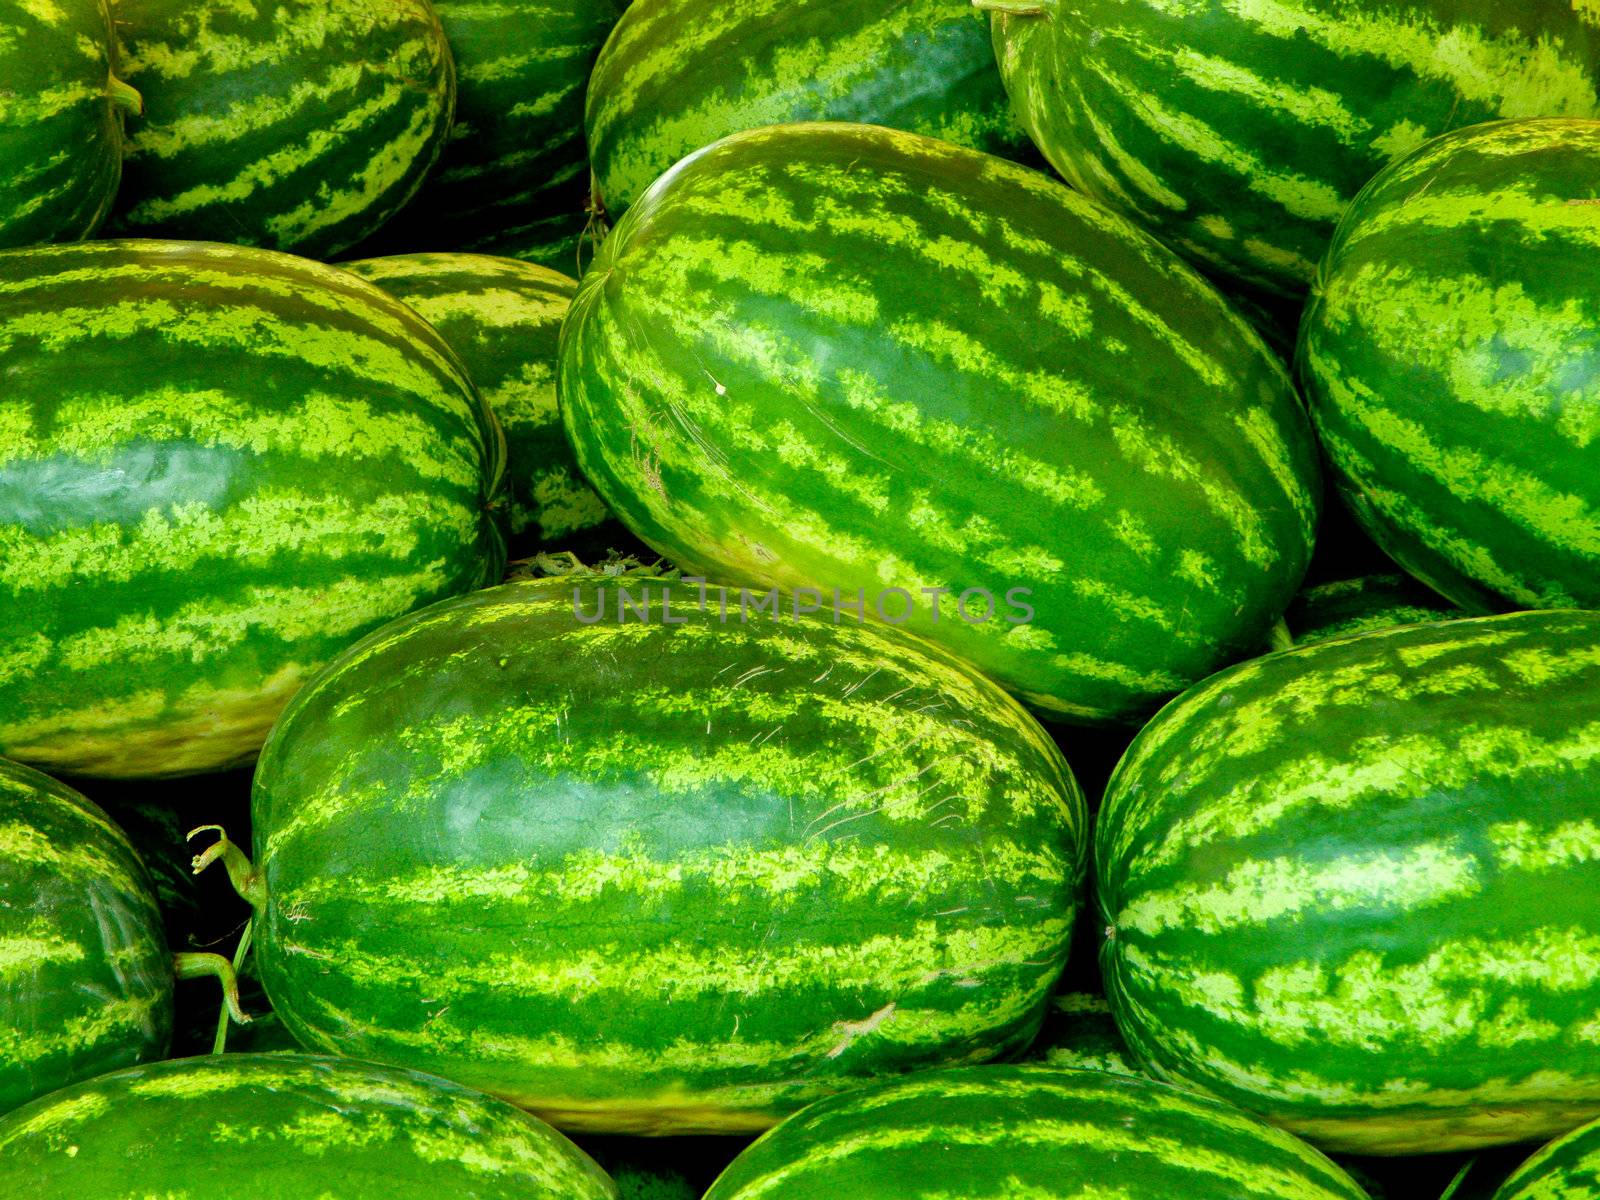 Green vivid watermellons detail by martinm303